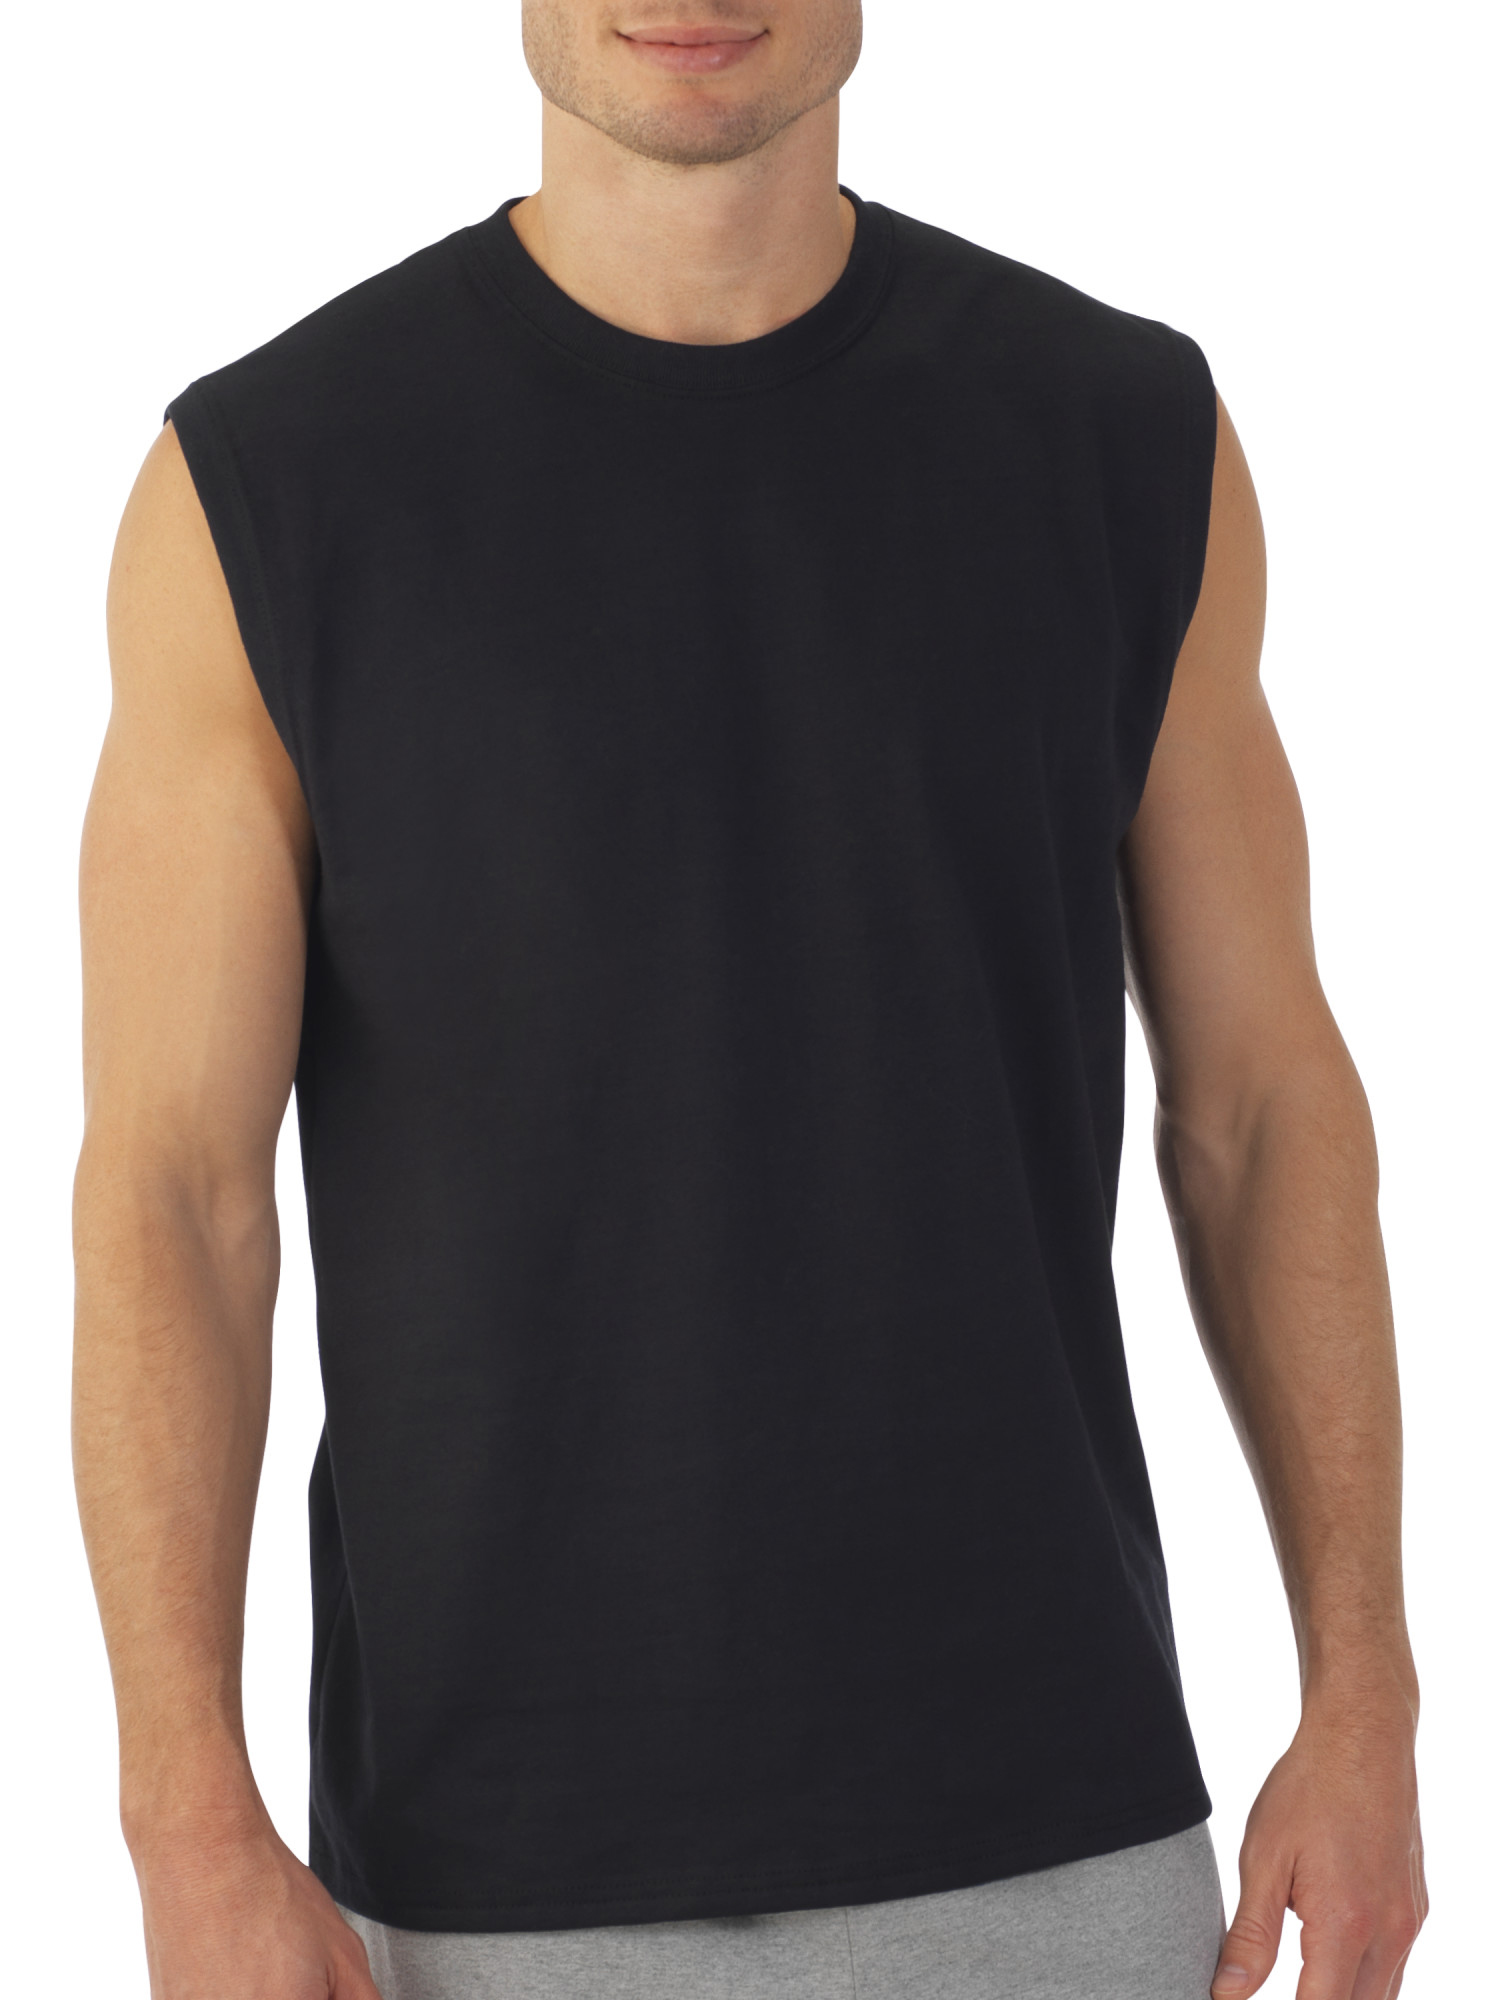 Fruit of the Loom - Men's Dual Defense UPF Muscle Shirt, Available